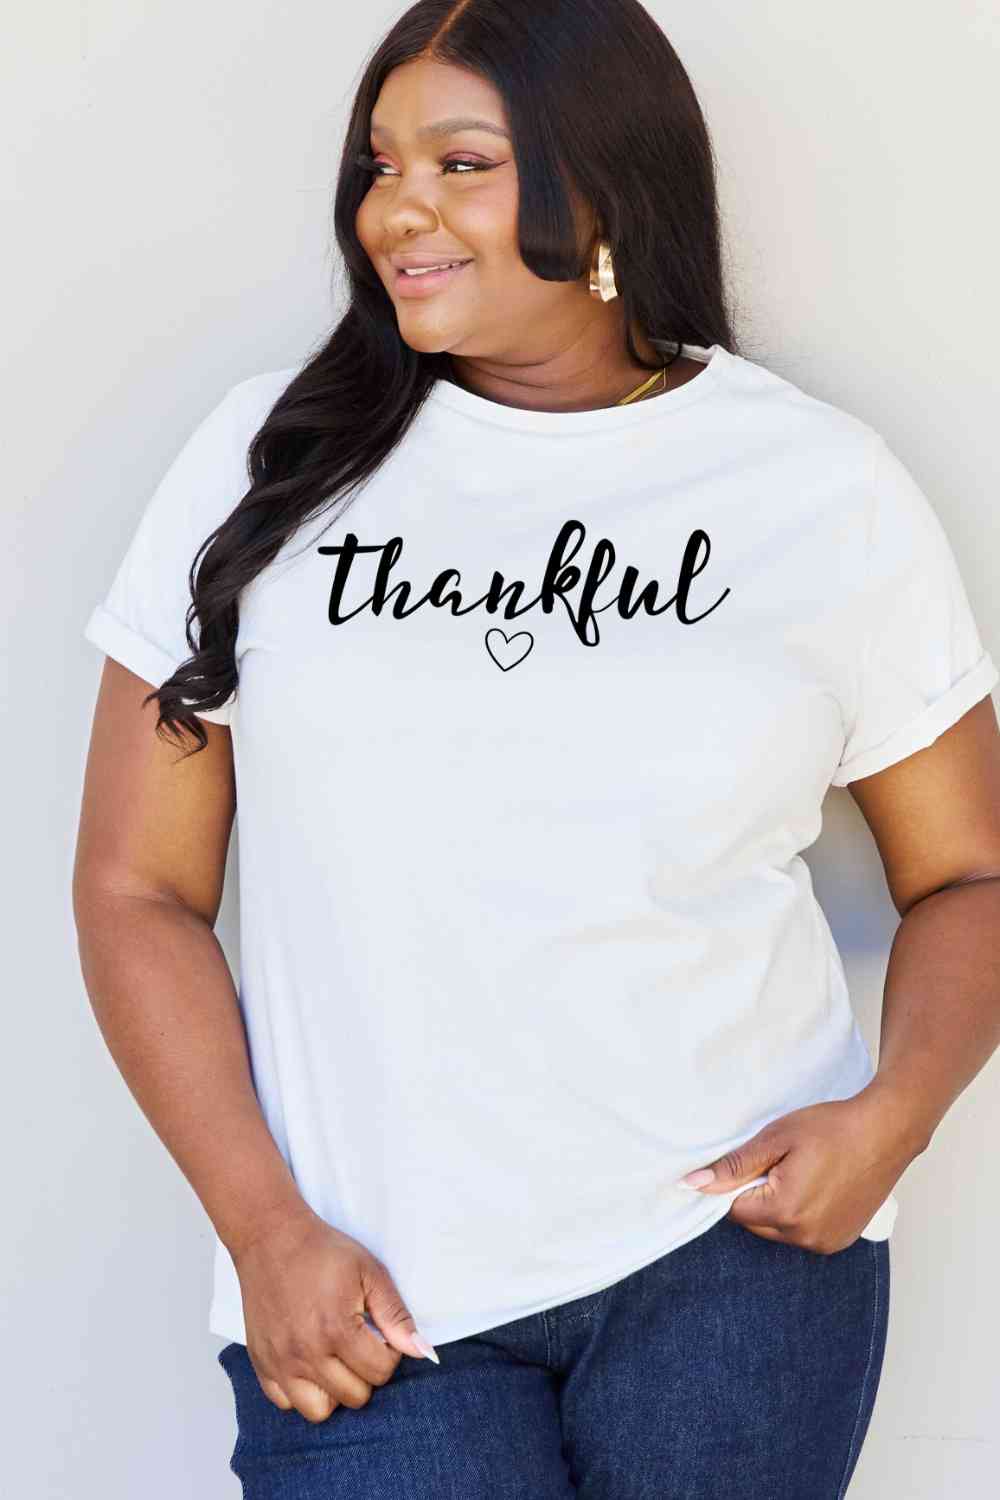 Simply Love Full Size THANKFUL Graphic T-Shirt